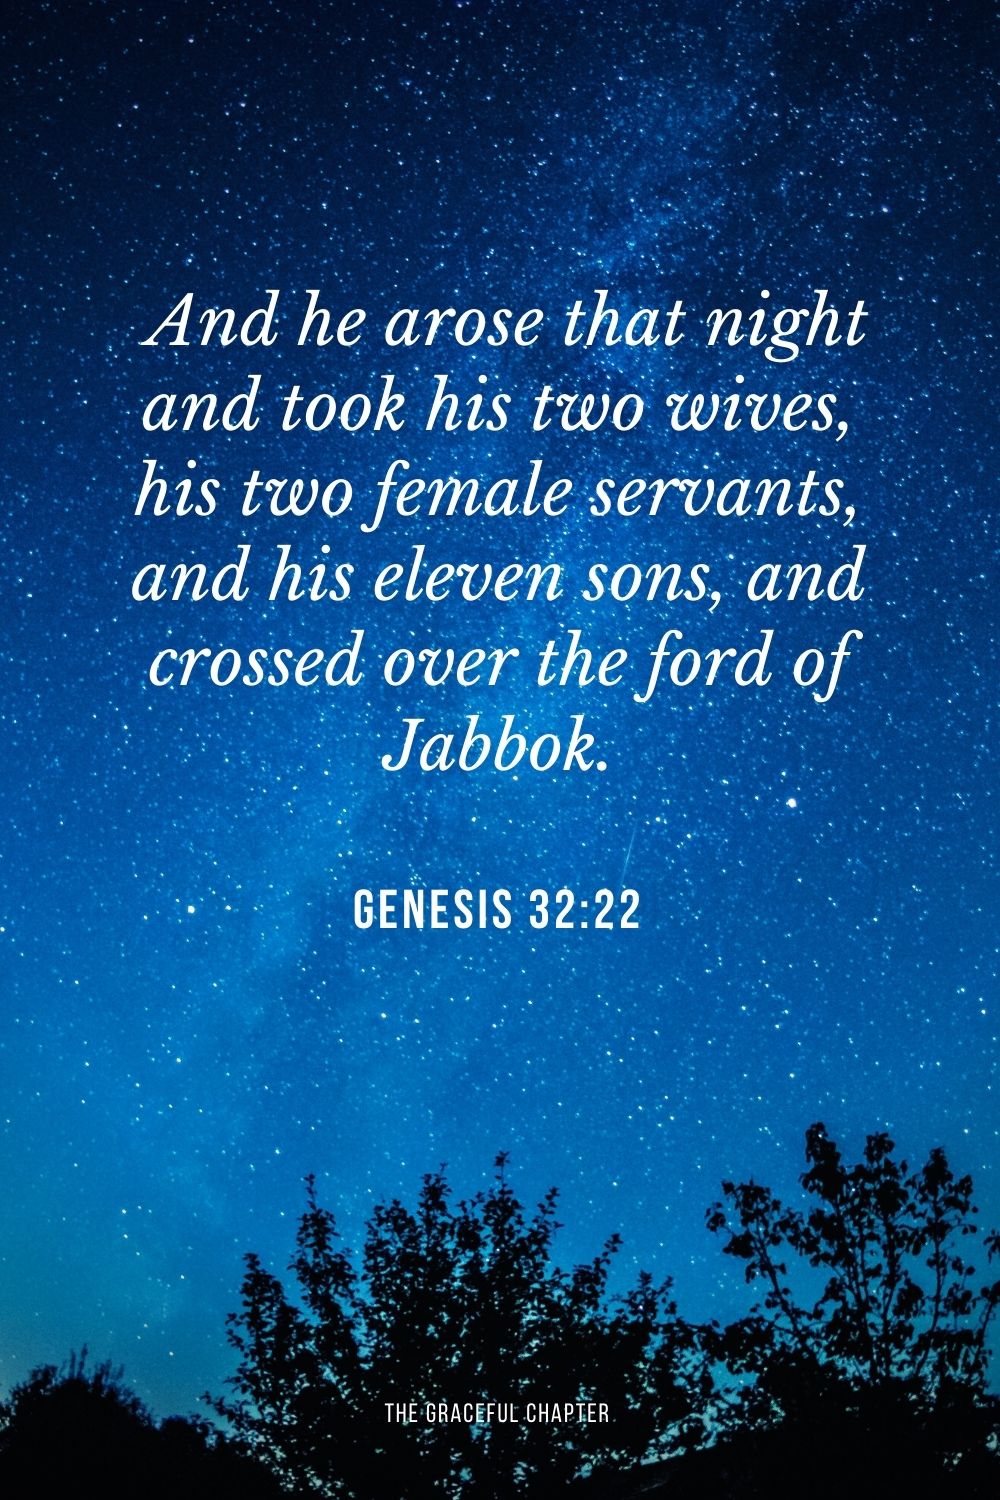  And he arose that night and took his two wives, his two female servants, and his eleven sons, and crossed over the ford of Jabbok. Genesis 32:22